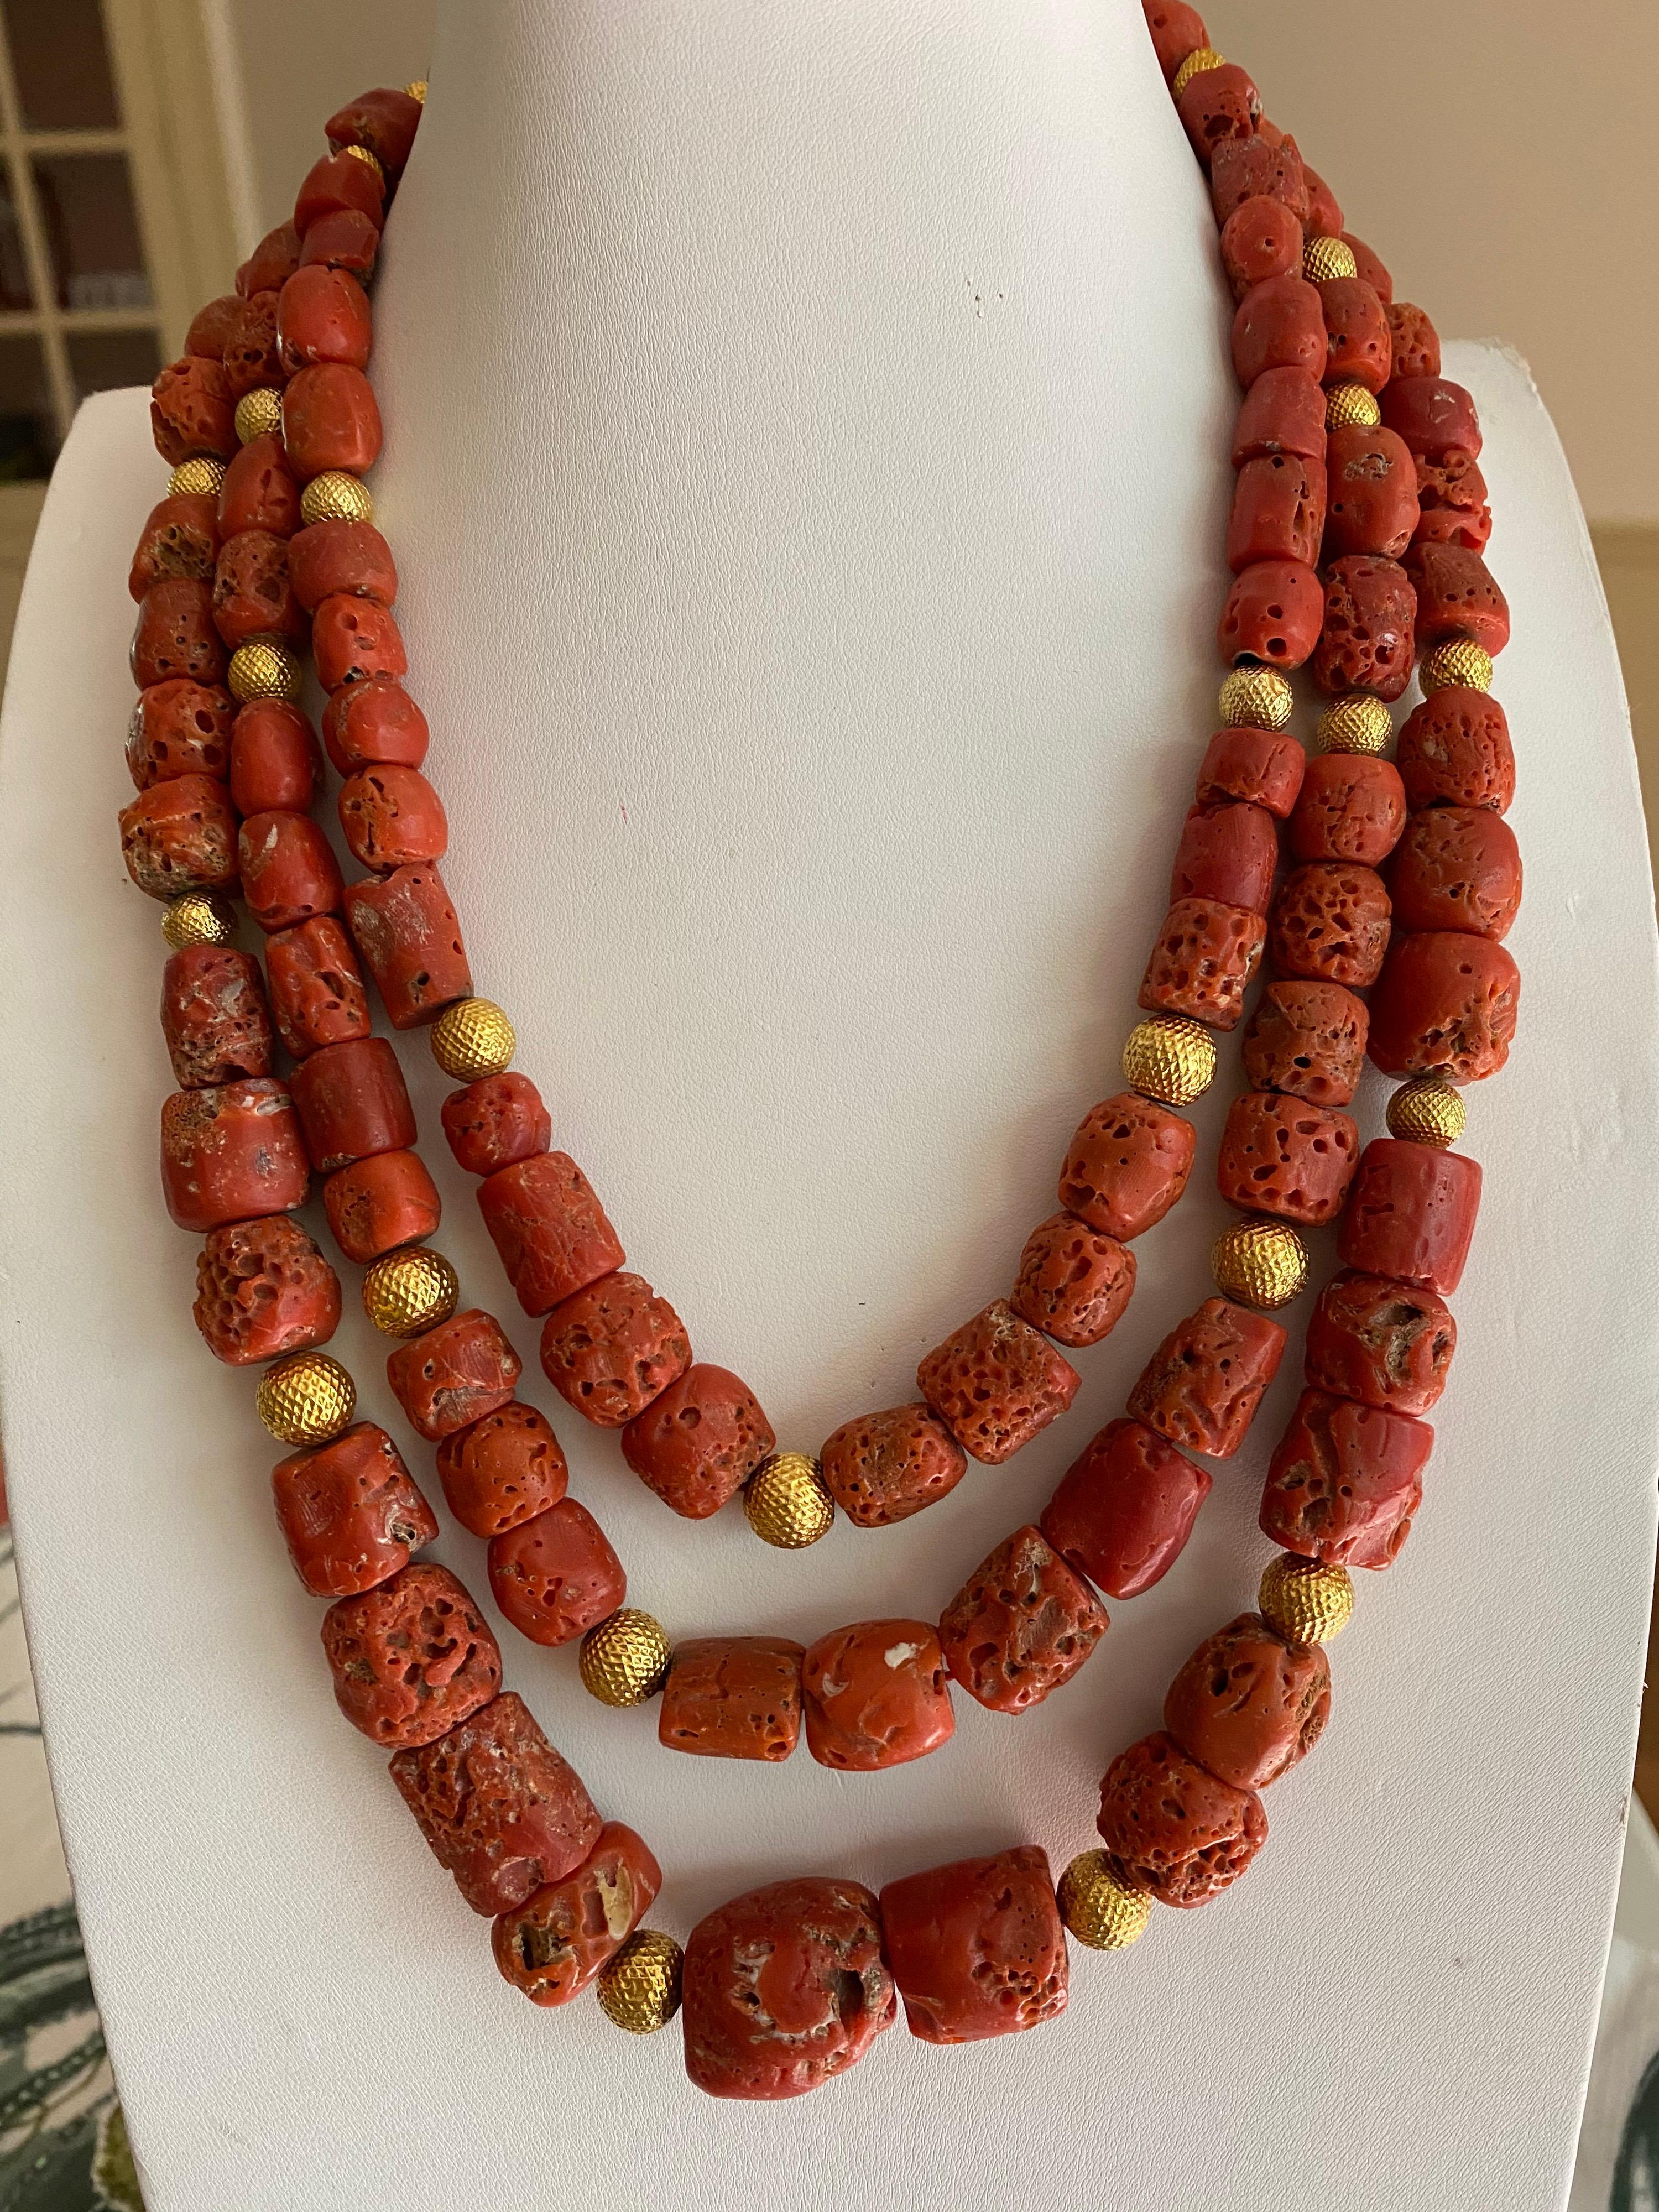 Jane Magon Collections Warrior Woman Red Coral Chunky 3 strand necklace with an easy clip clasp is a fashion staple for any woman's closet. These natural colored Red Coral are warming to the skin and the gold plated balls give it warmth and balance.